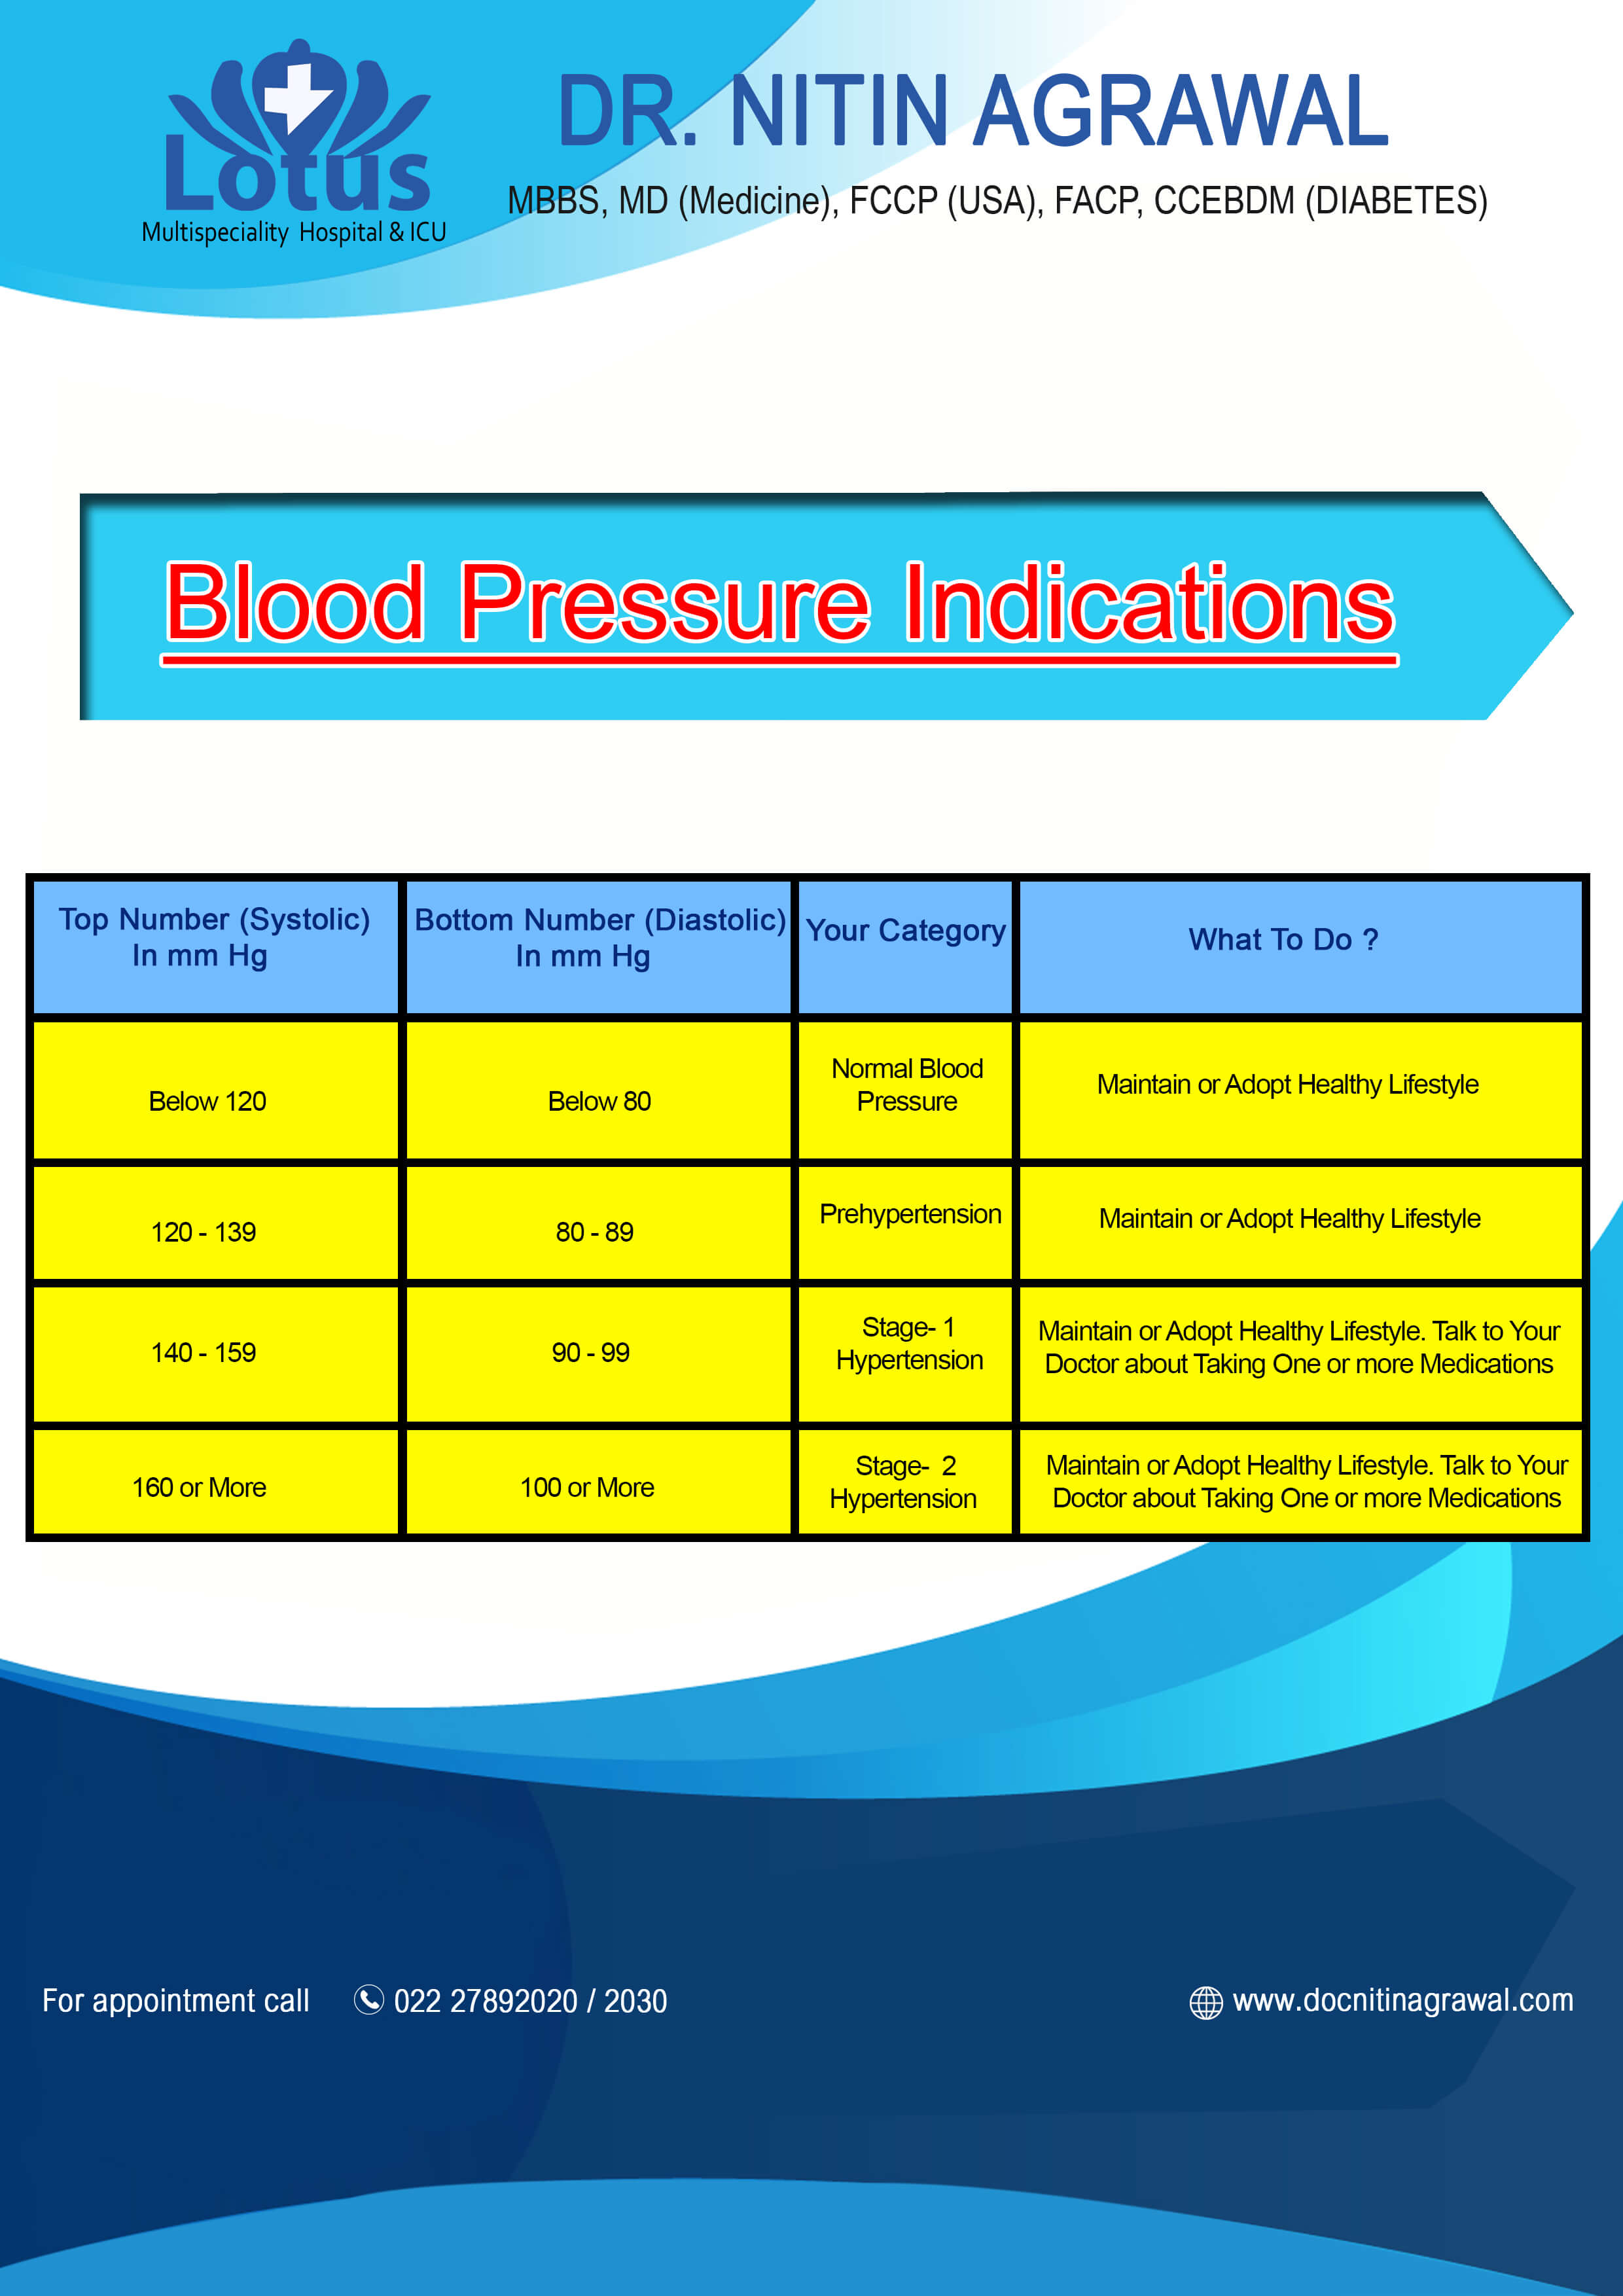 Blood Pressure Indication by Dr. Nitin Agrawal best Cardiologist & Diabetologist at Lotus Health Care & Advanced Diabetes Center in Vashi, Navi Mumbai